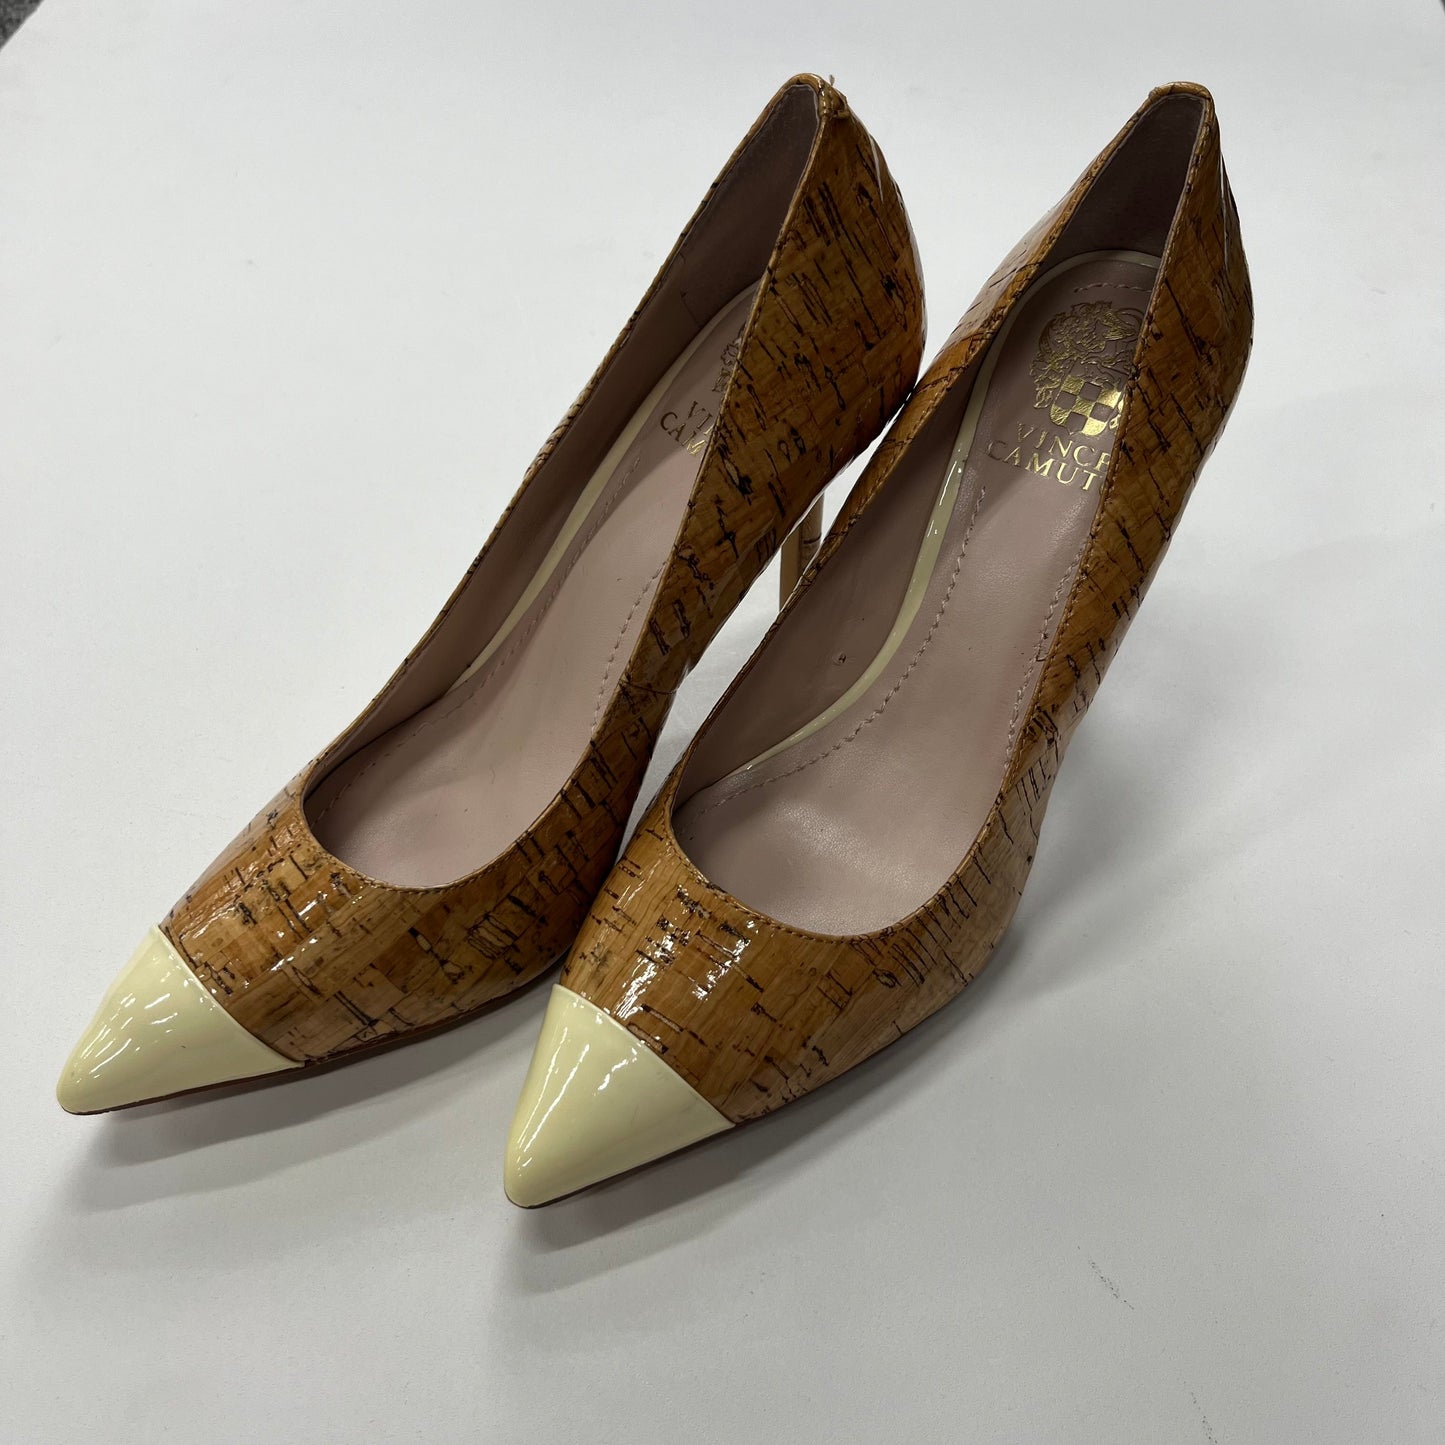 Shoes Heels D Orsay By Vince Camuto  Size: 8.5